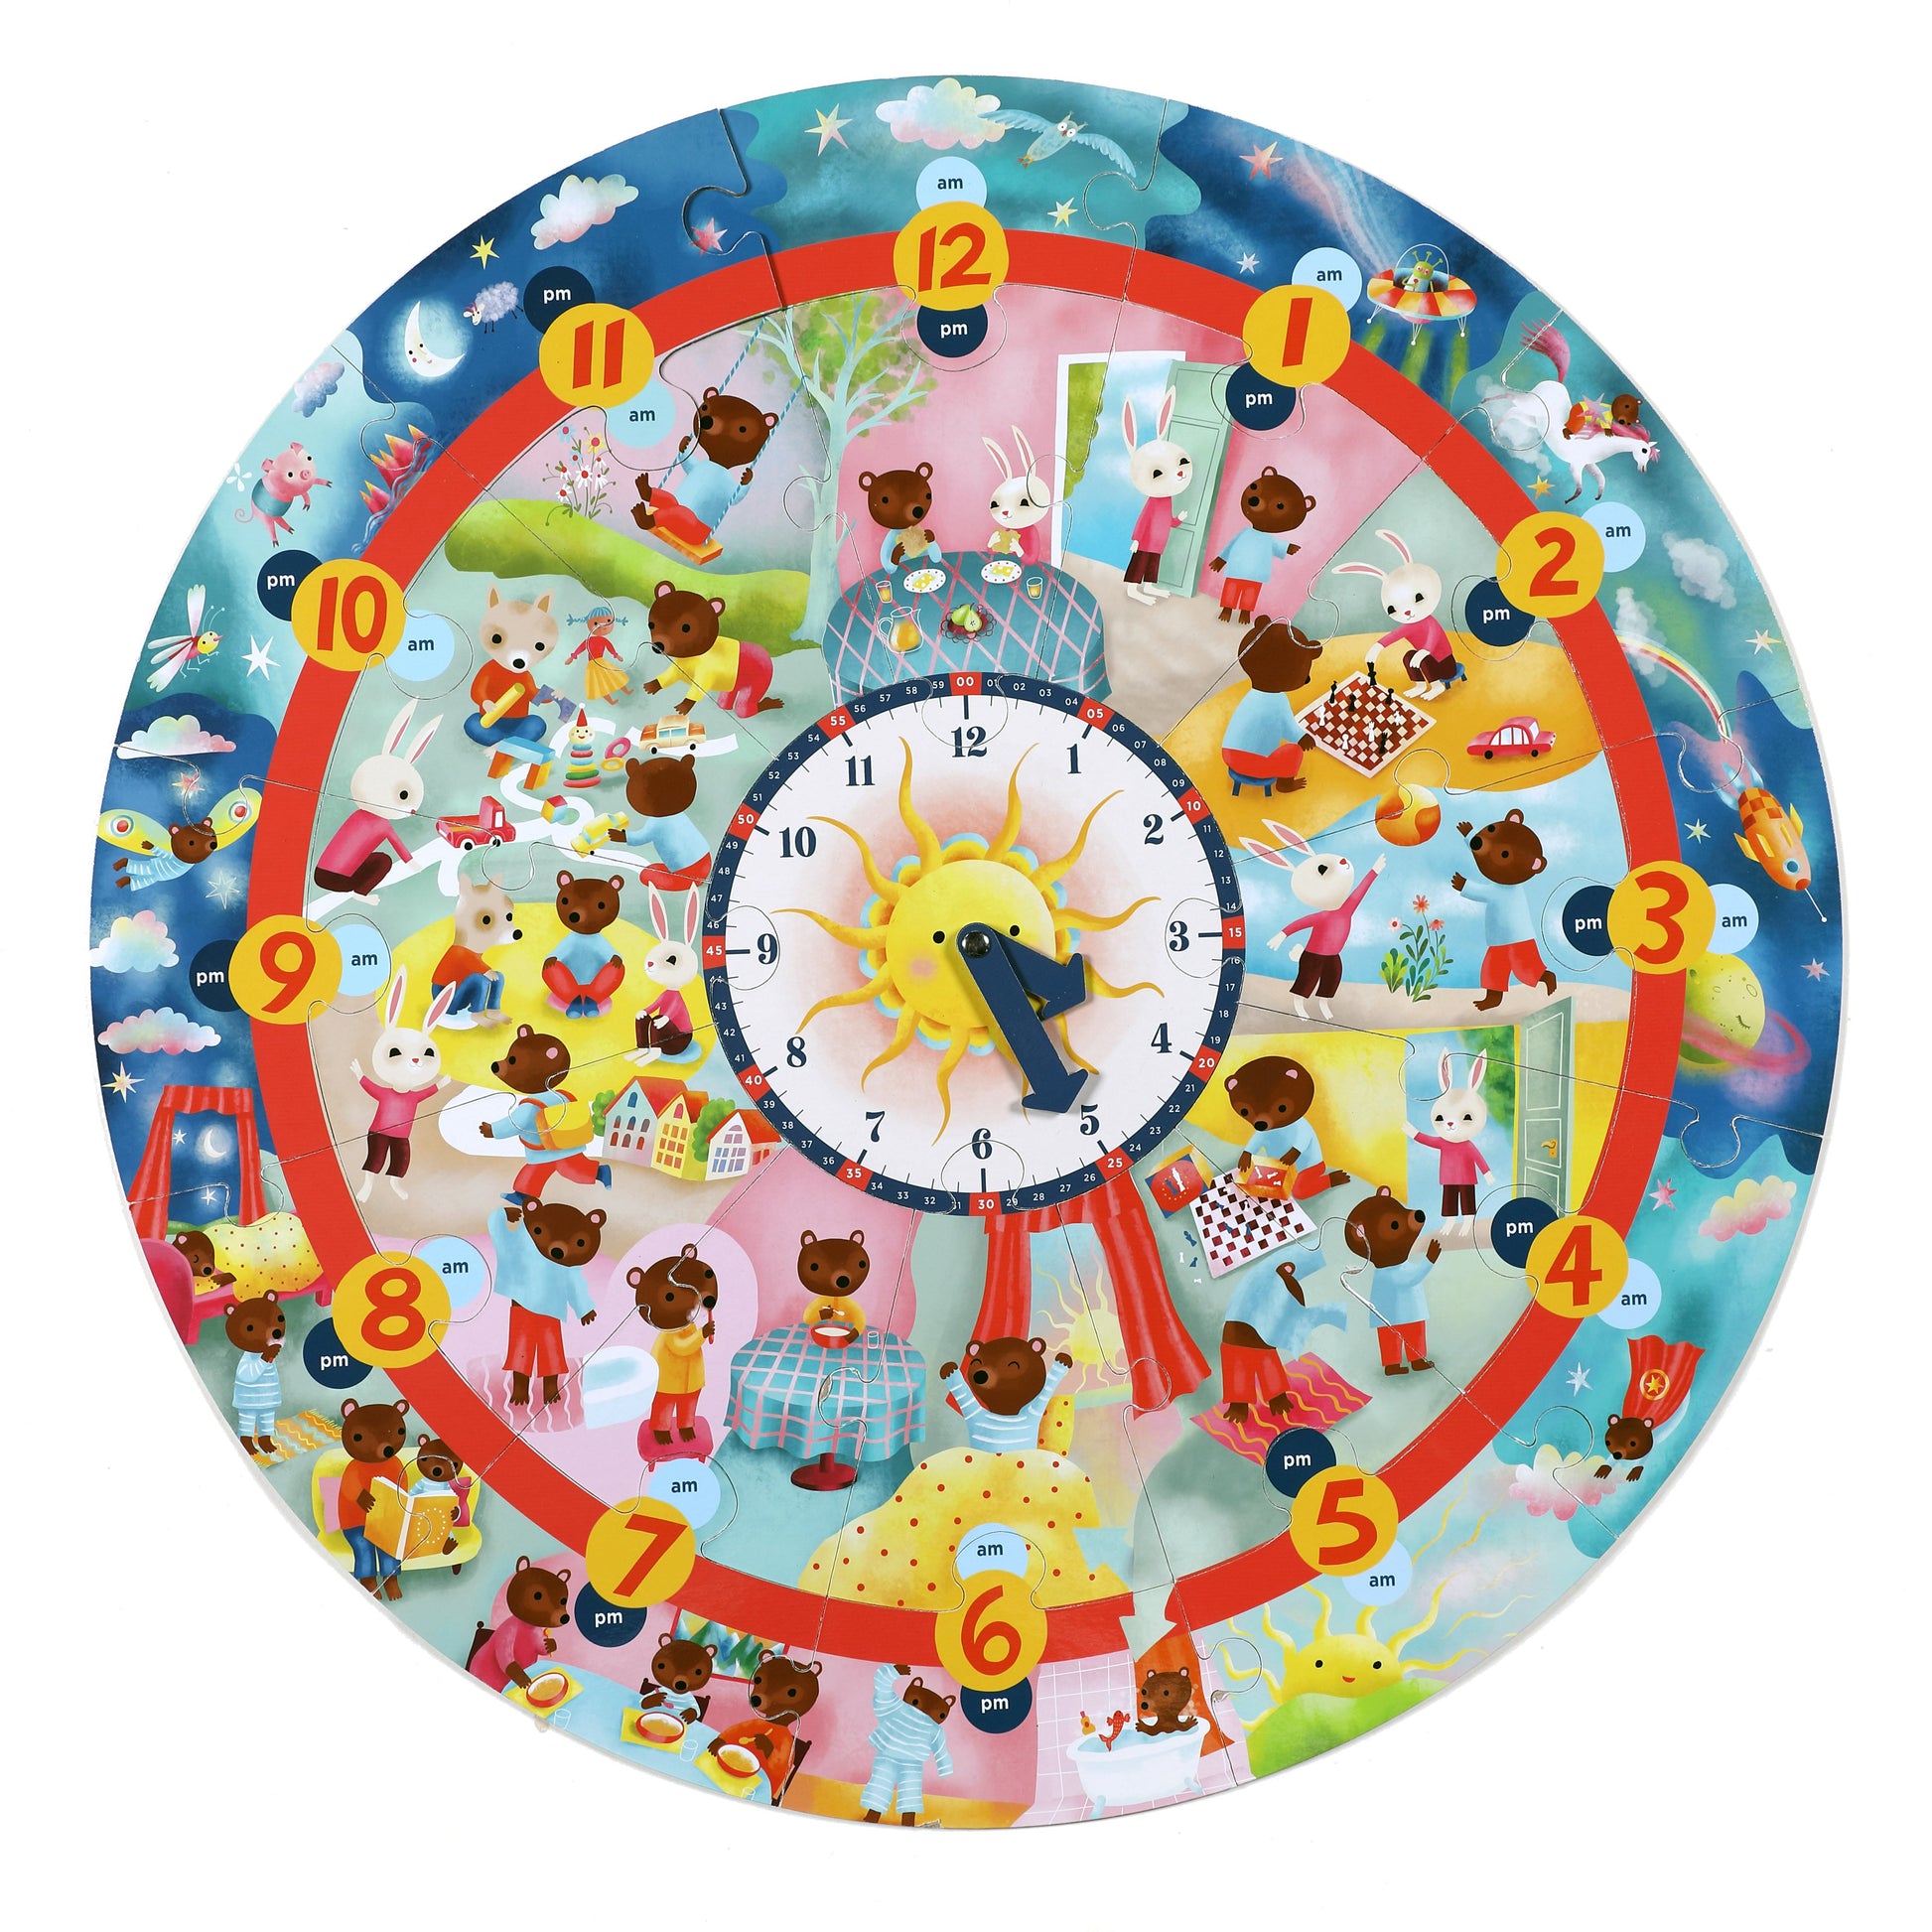 Around the Clock Puzzle - Learn to Tell Time eeBoo | For Kids Ages 3+